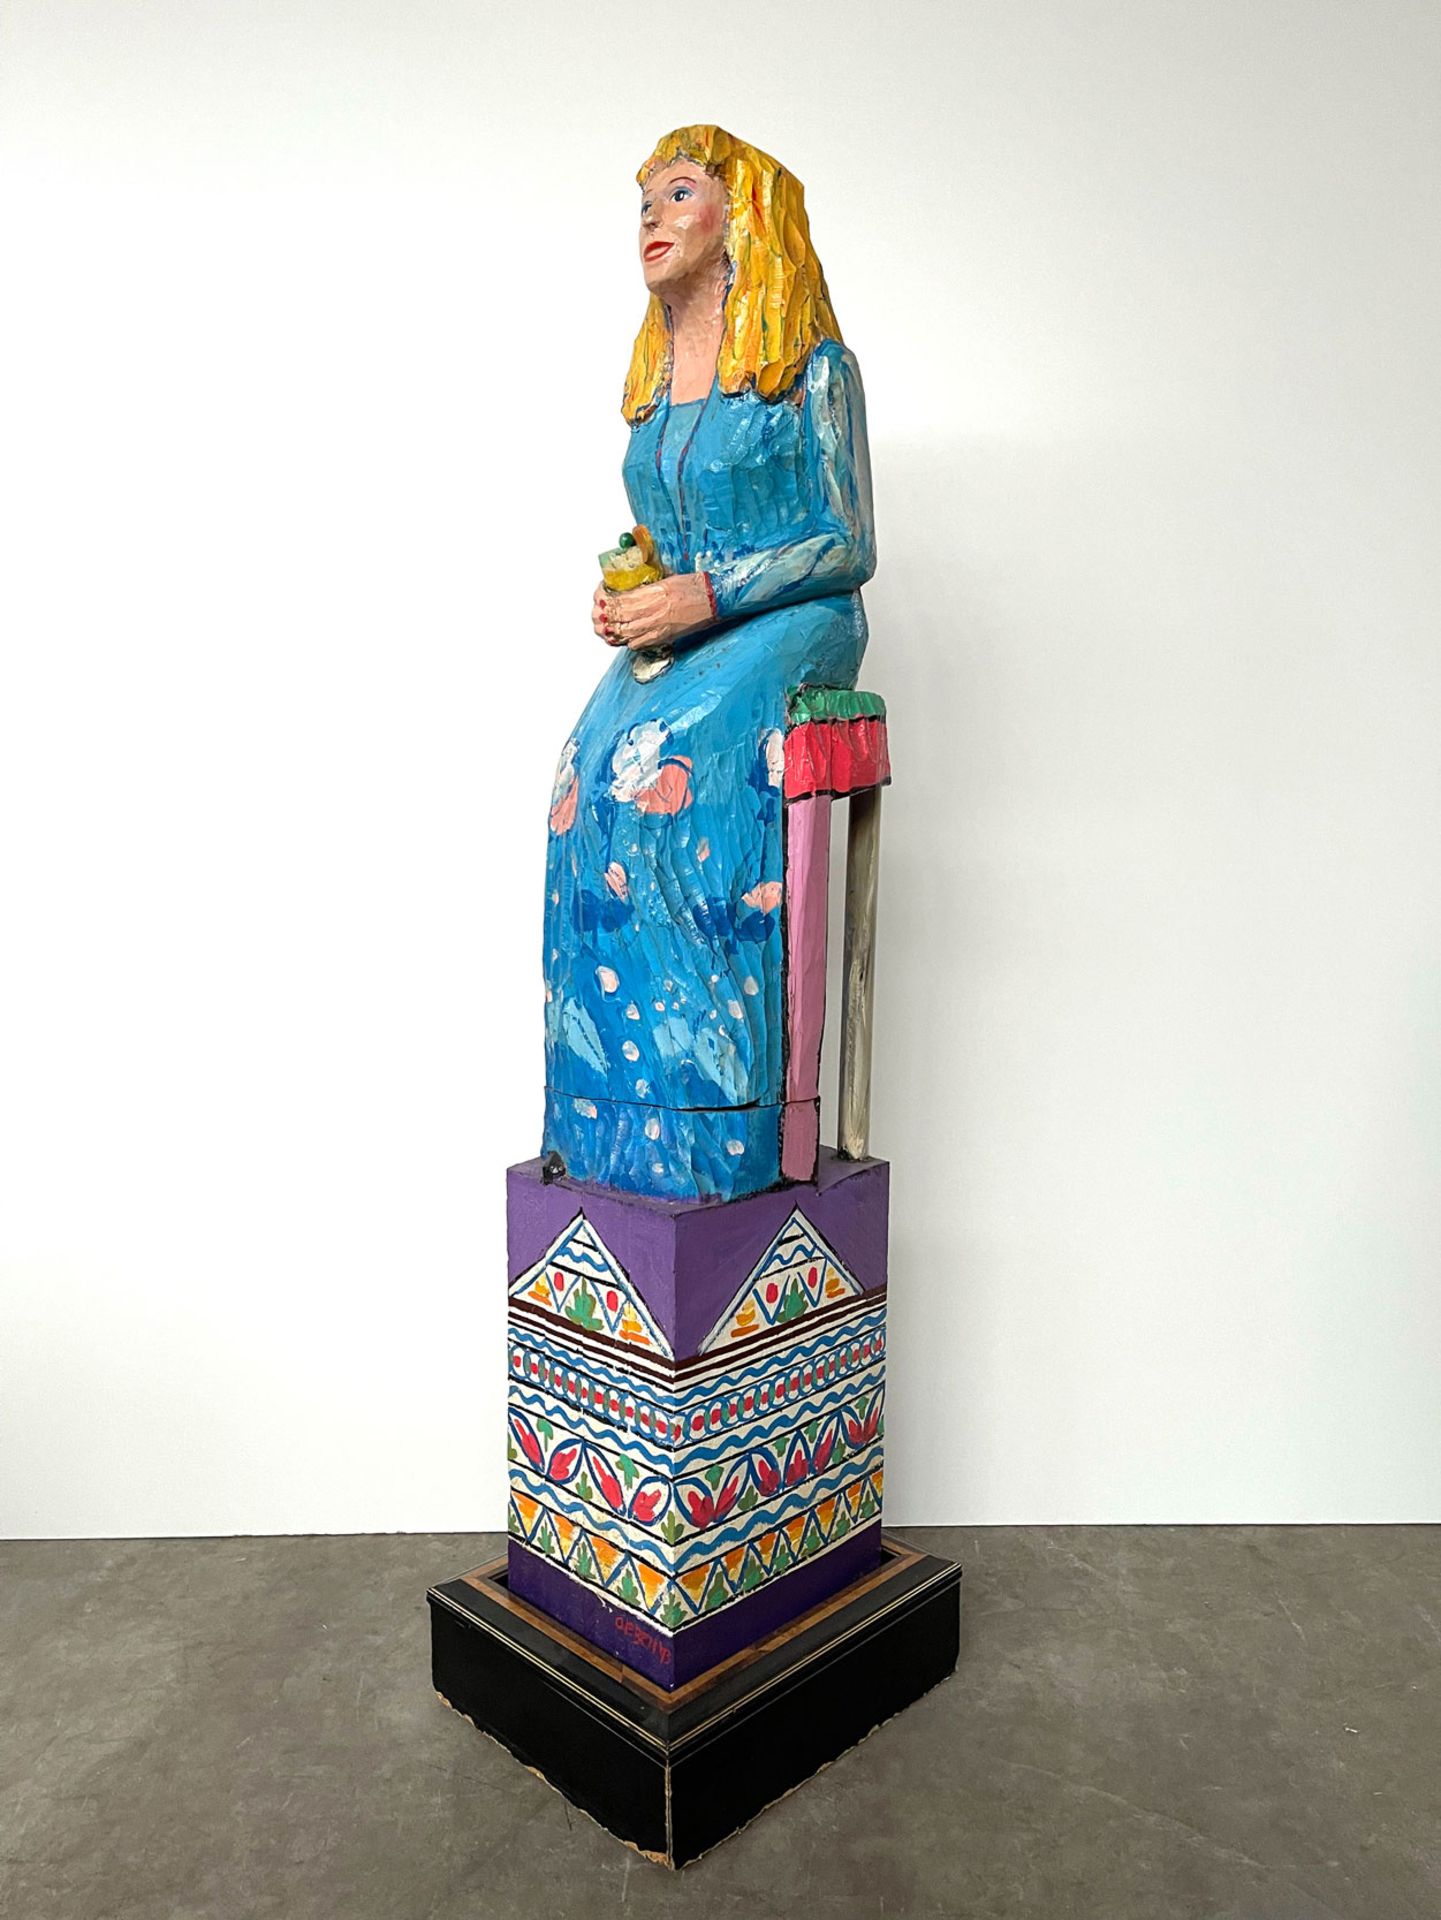 Wooden Statue Depicting a Woman on a Chair with Cocktail - Image 8 of 10